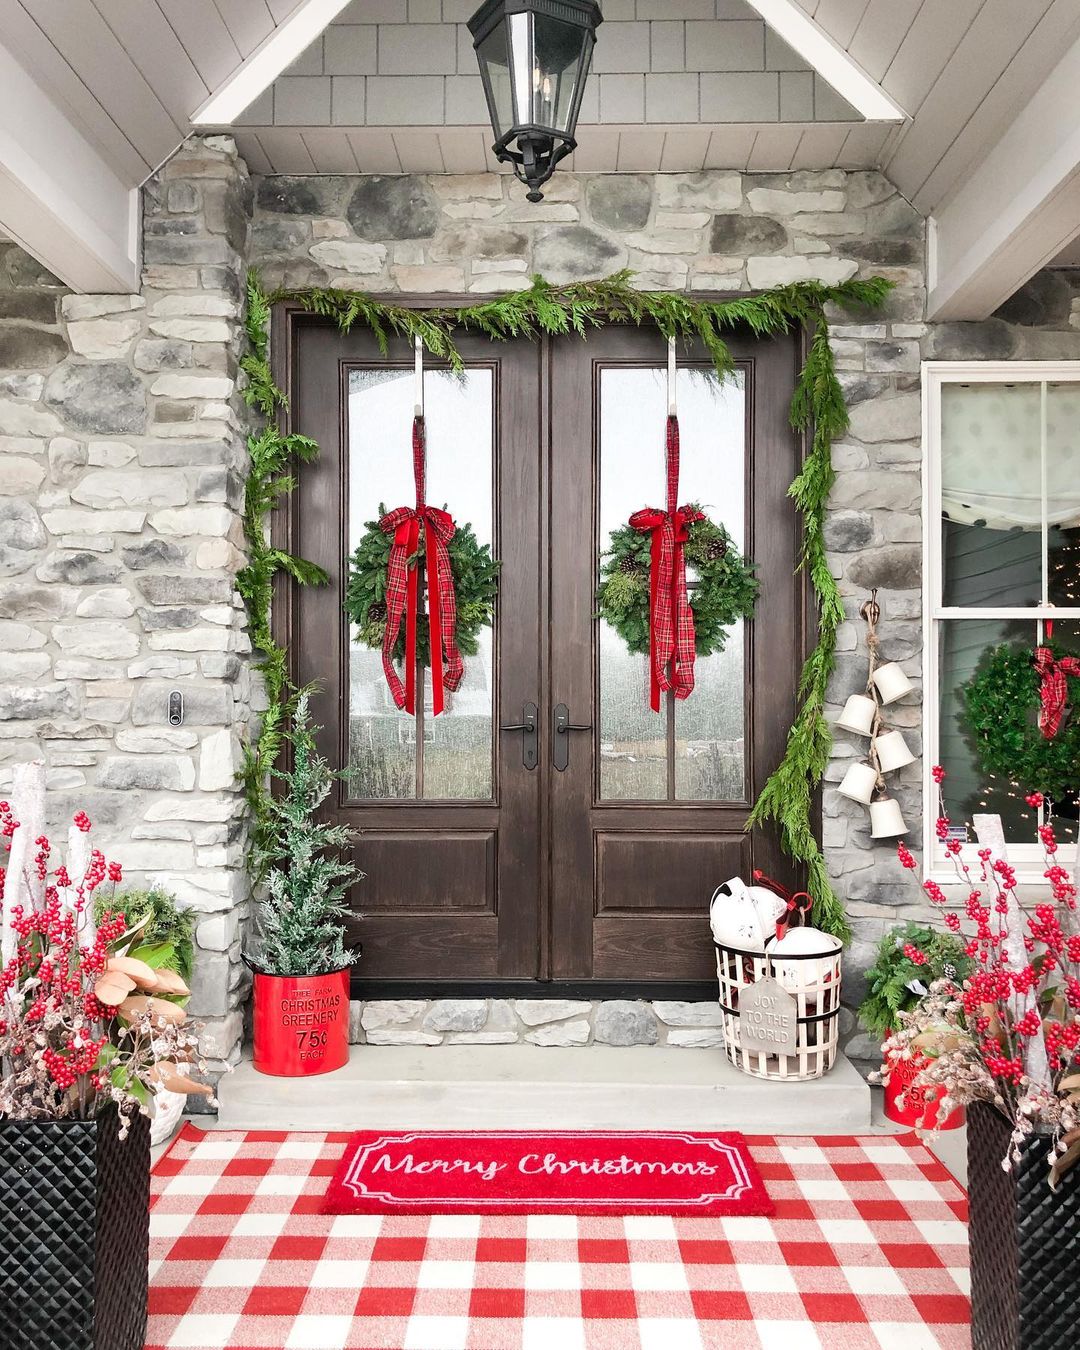 Double front doors lined with garland and two wreathes hanging on the door windows. Photo by Instagram user @beyond_gray.